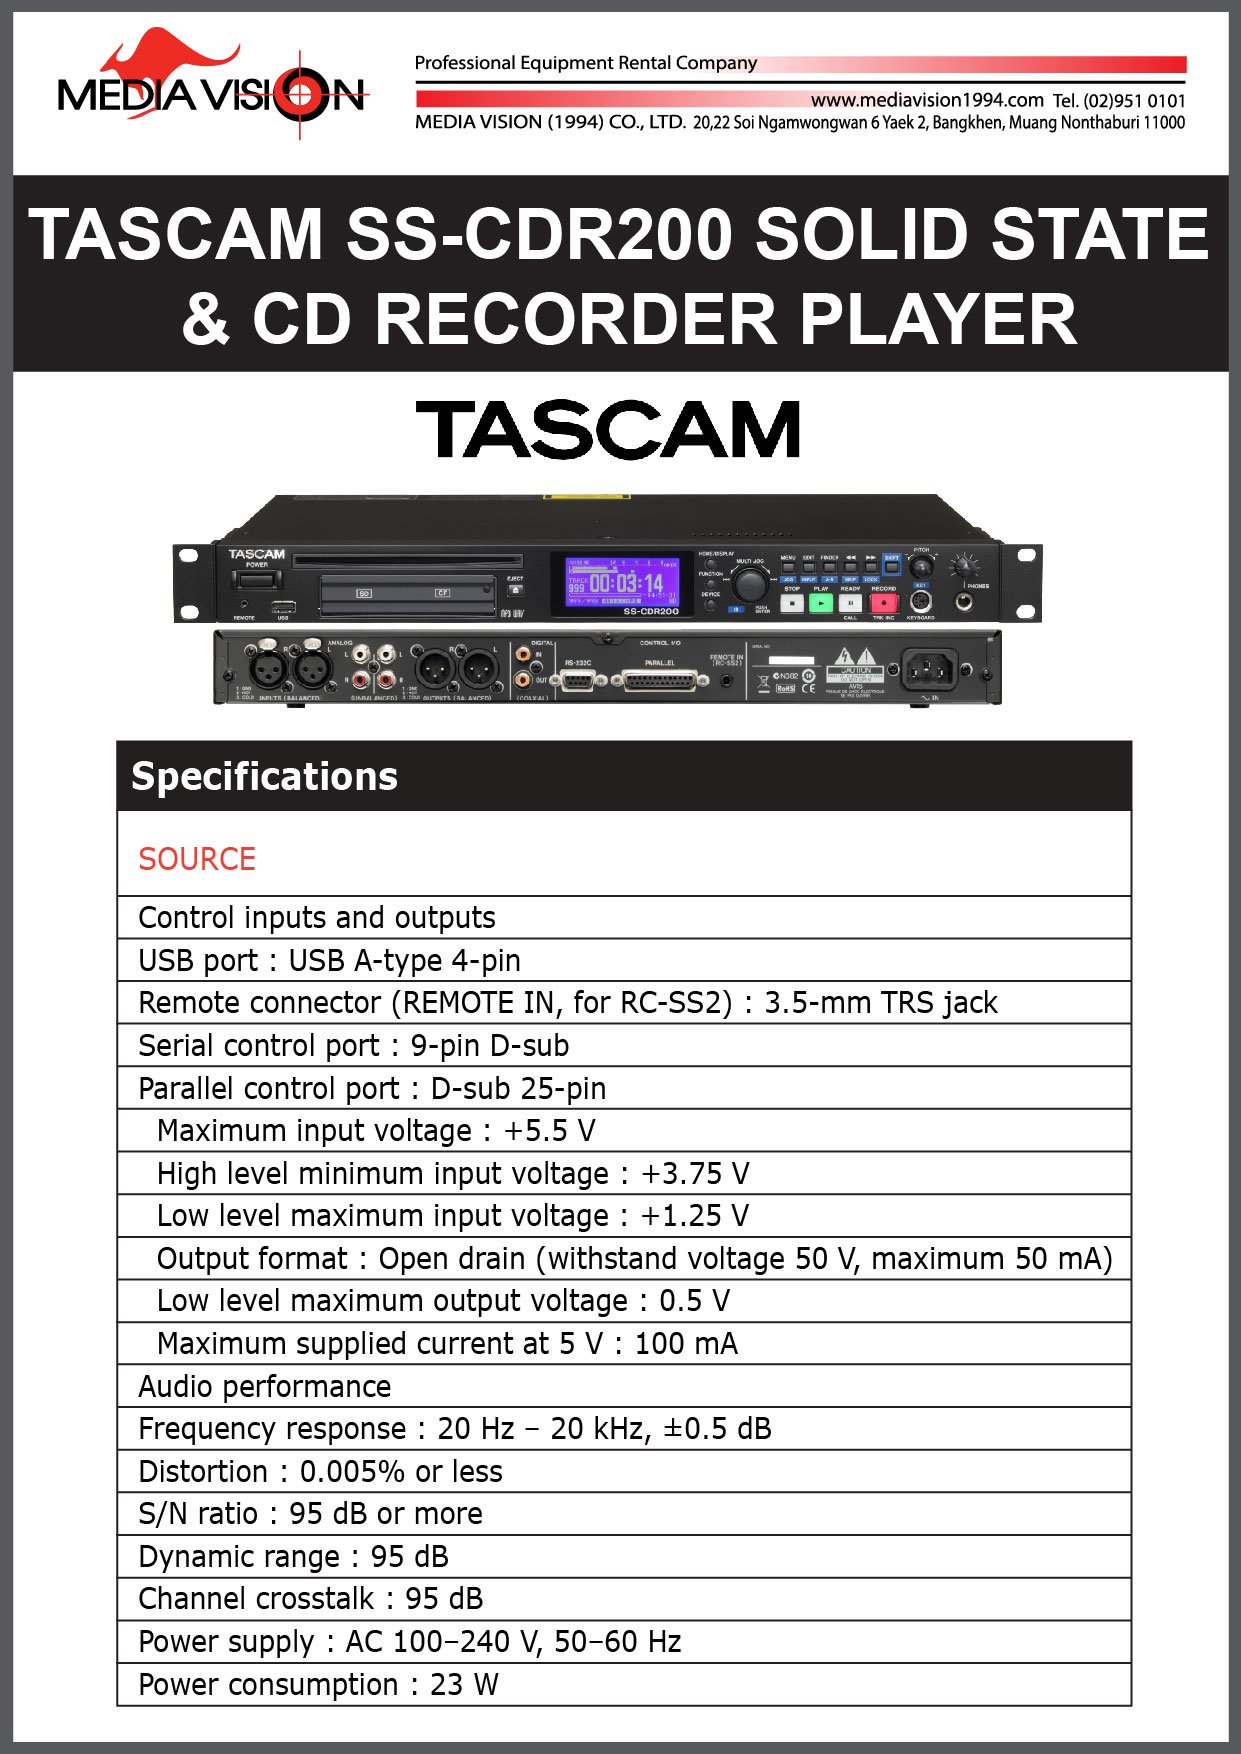 TASCAM SS-CDR200 SOLID STATE & CD RECORDER PLAYER